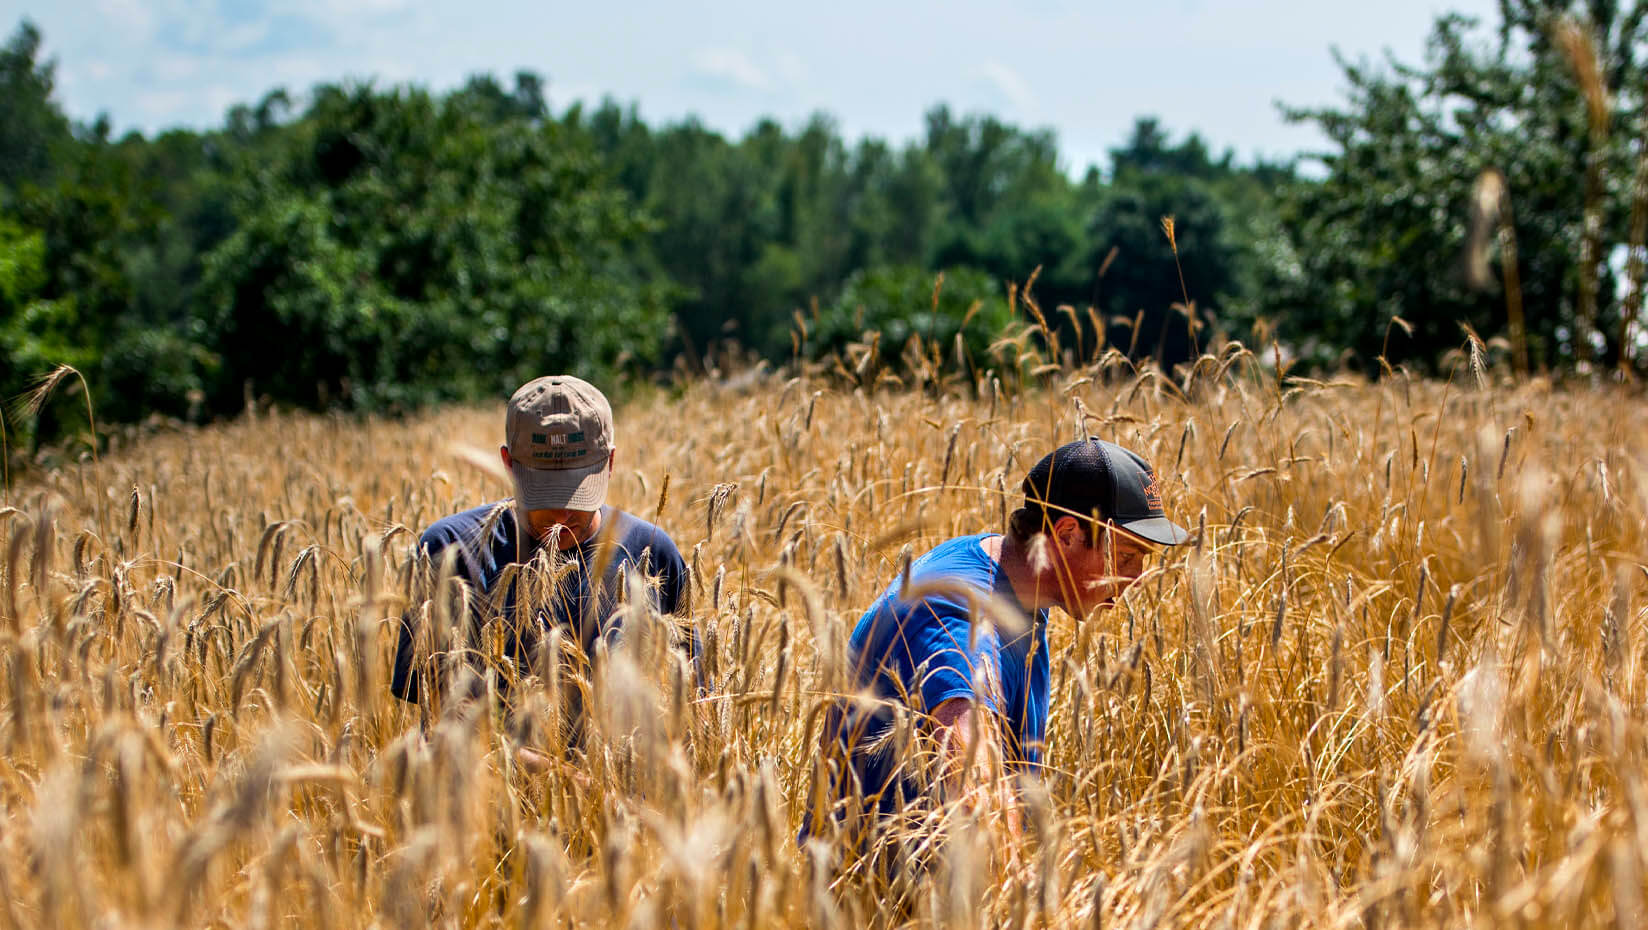 A photo of two people in a grain field